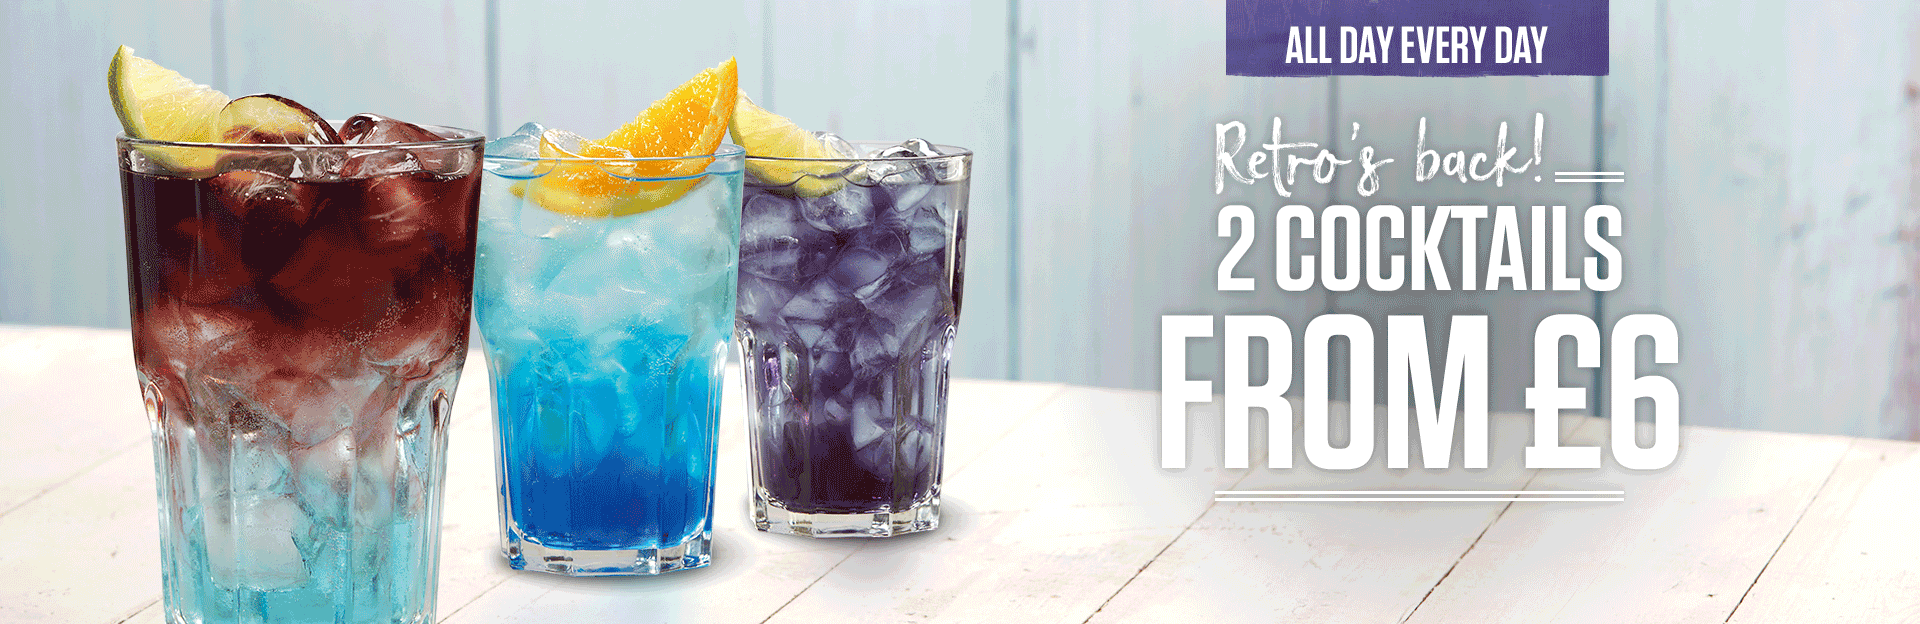 2 cocktails from just £6.00 offer